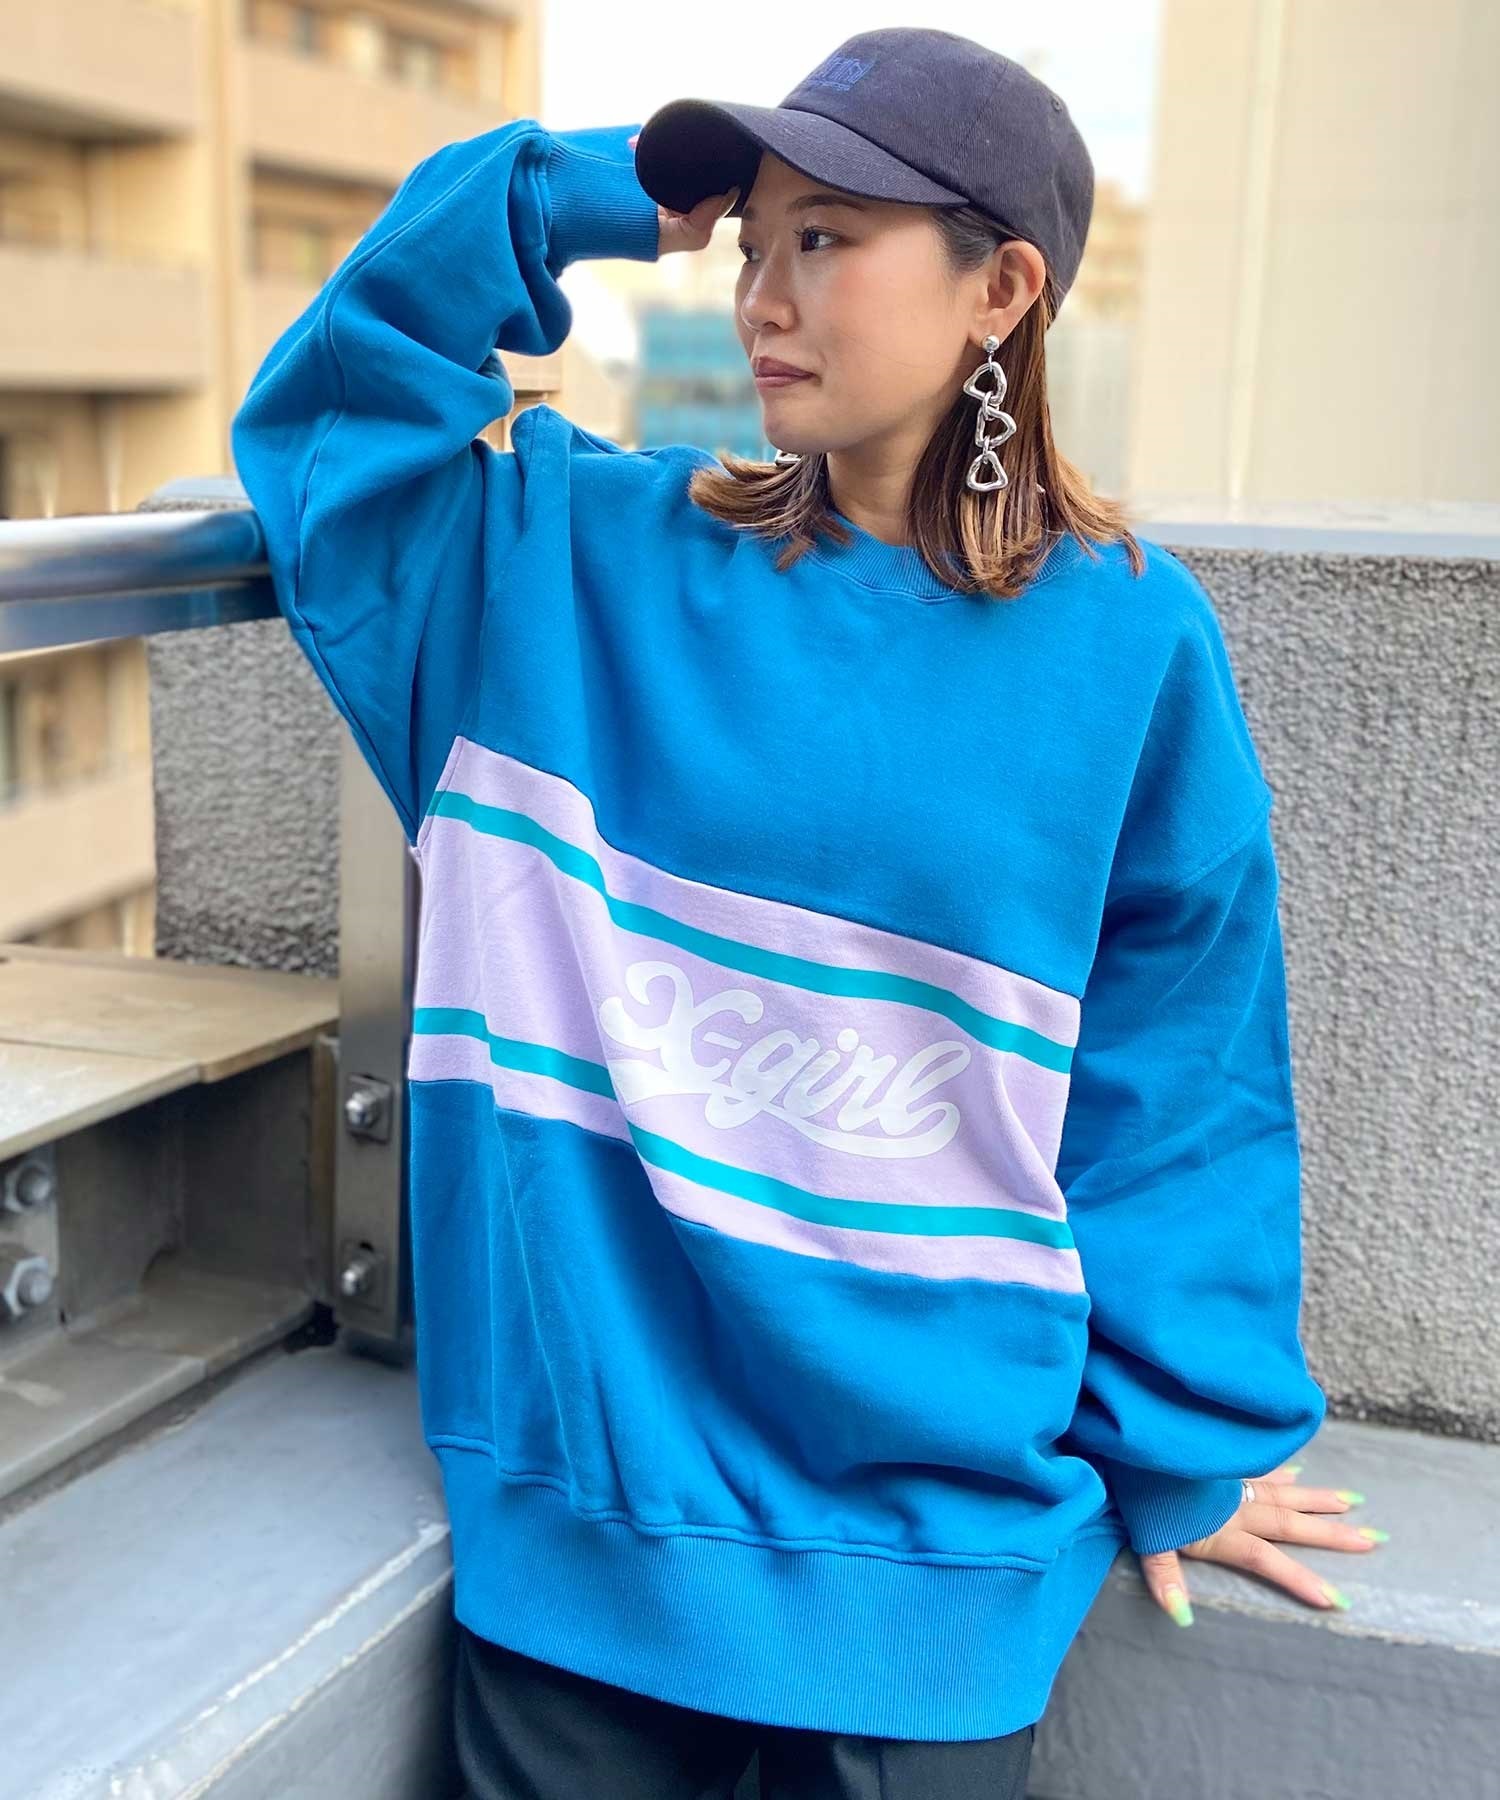 X-GIRL/エックスガール CONTRAST COLOR SWEAT TOP レディース ...